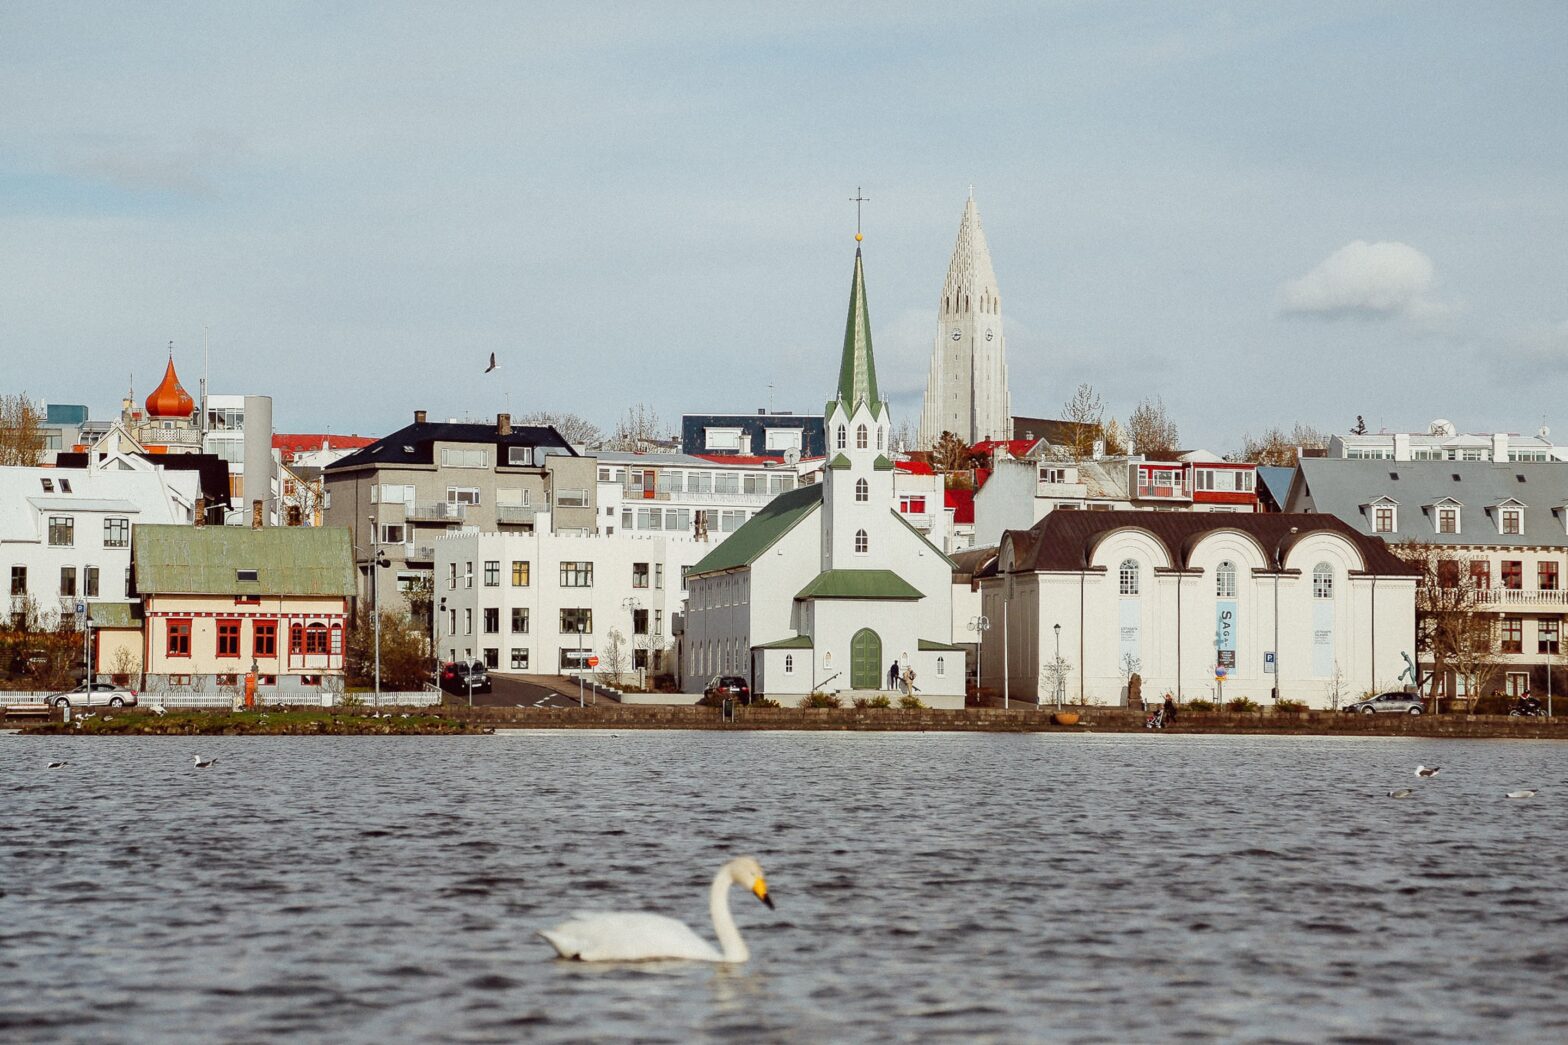 Reykjavik, Iceland Travel Guide: Explore The Culture Beyond The Northern Lights